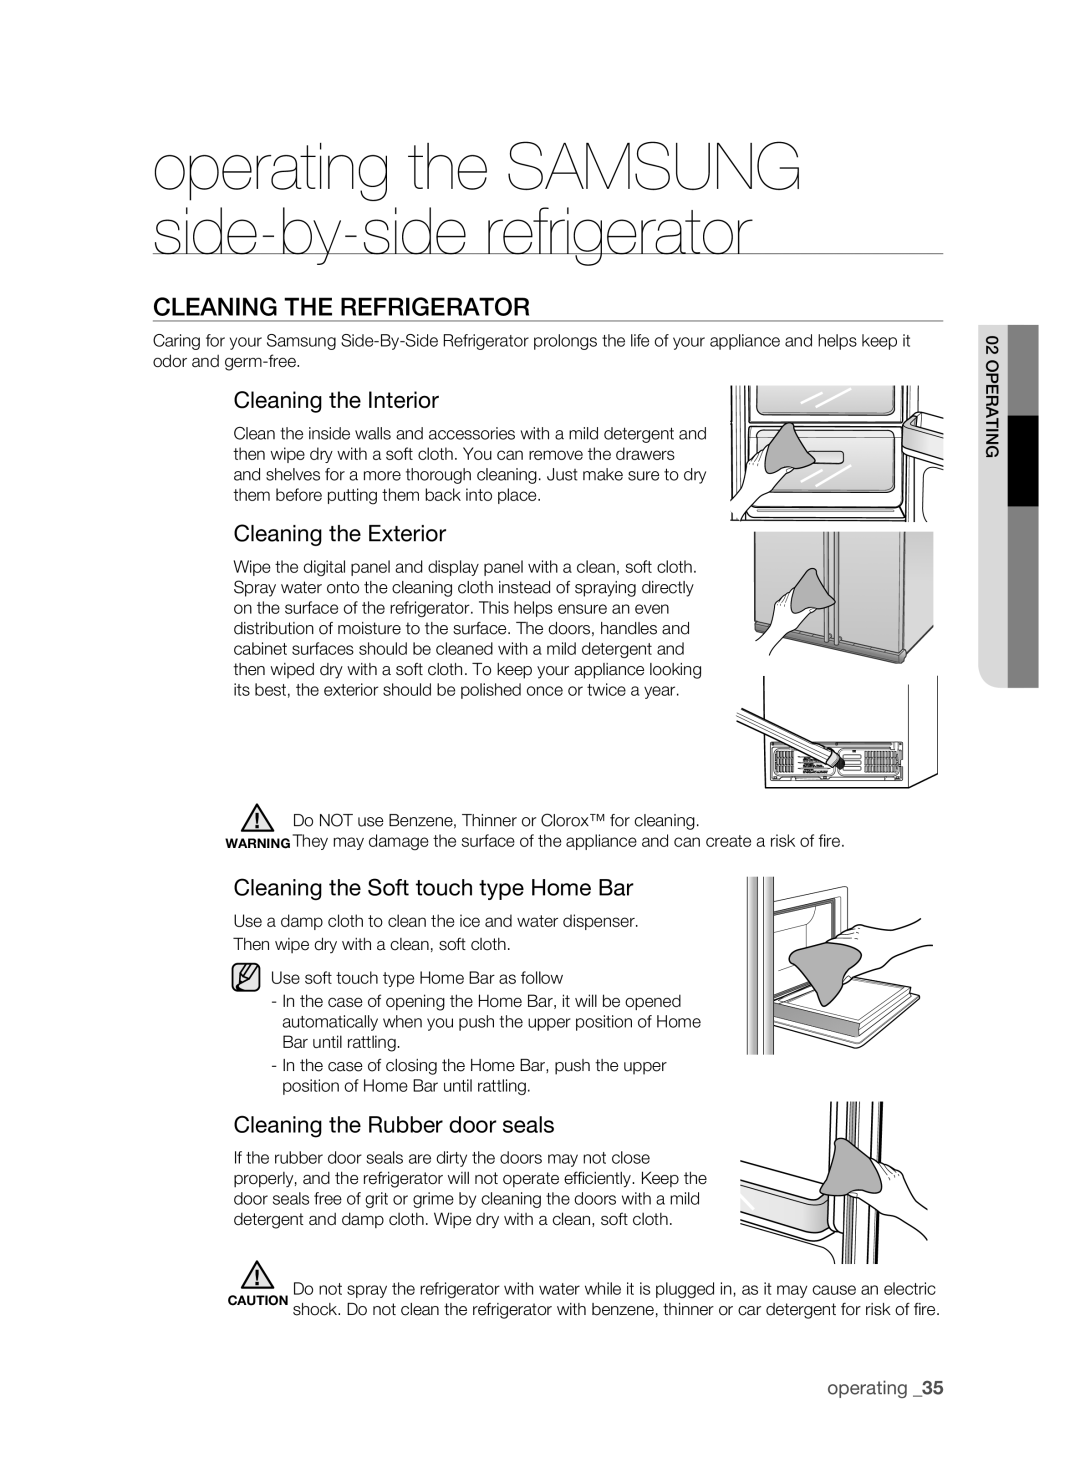 Samsung SRS610HDSS Cleaning the refrigerator, Cleaning the Interior, Cleaning the Exterior, Cleaning the Rubber door seals 